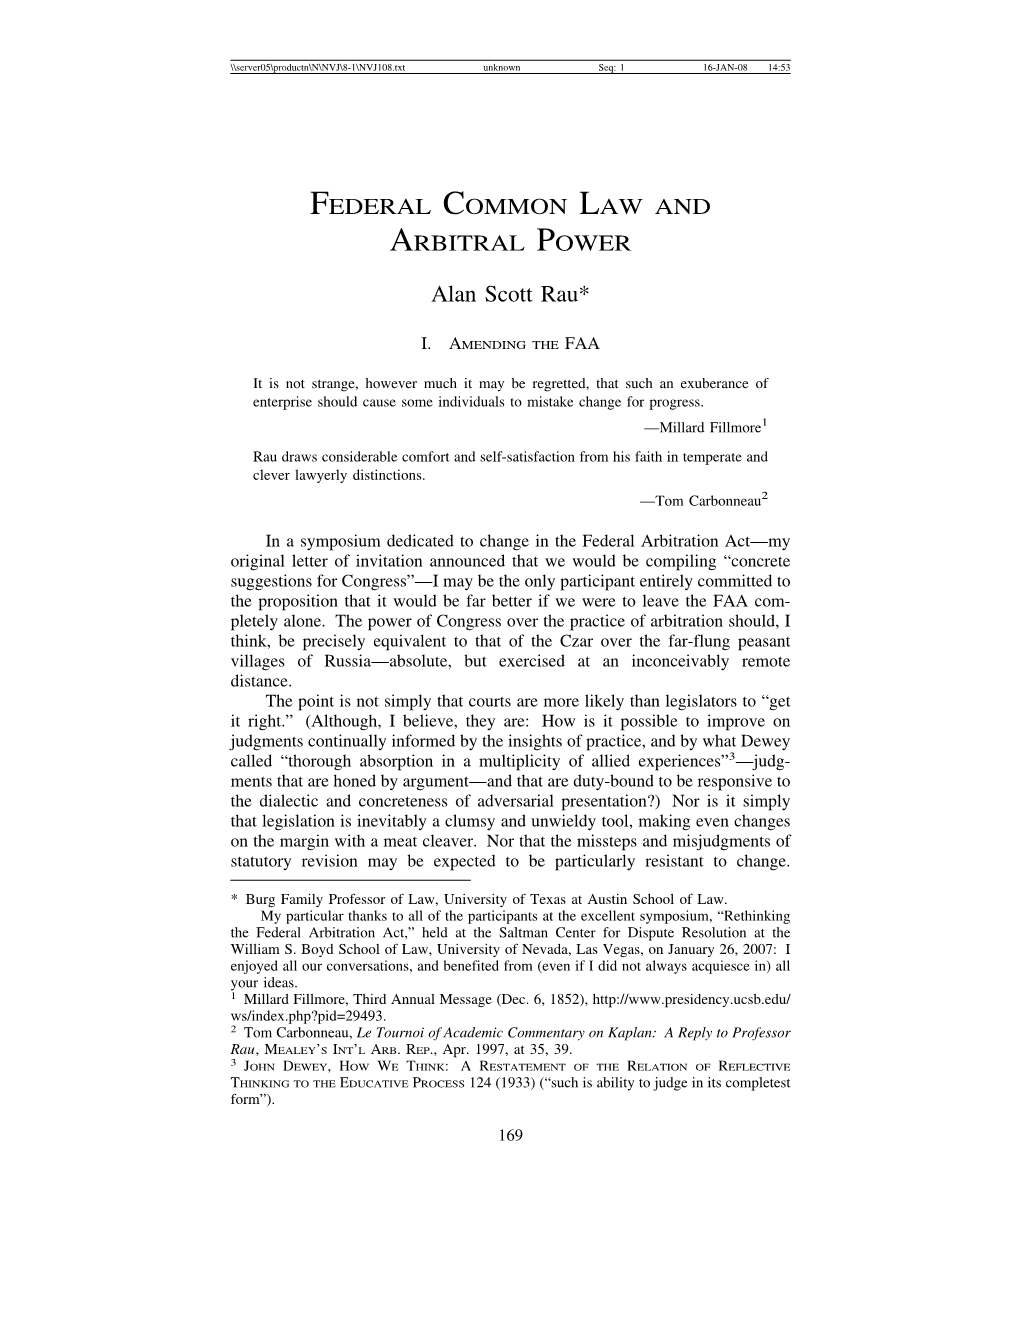 Federal Common Law and Arbitral Power